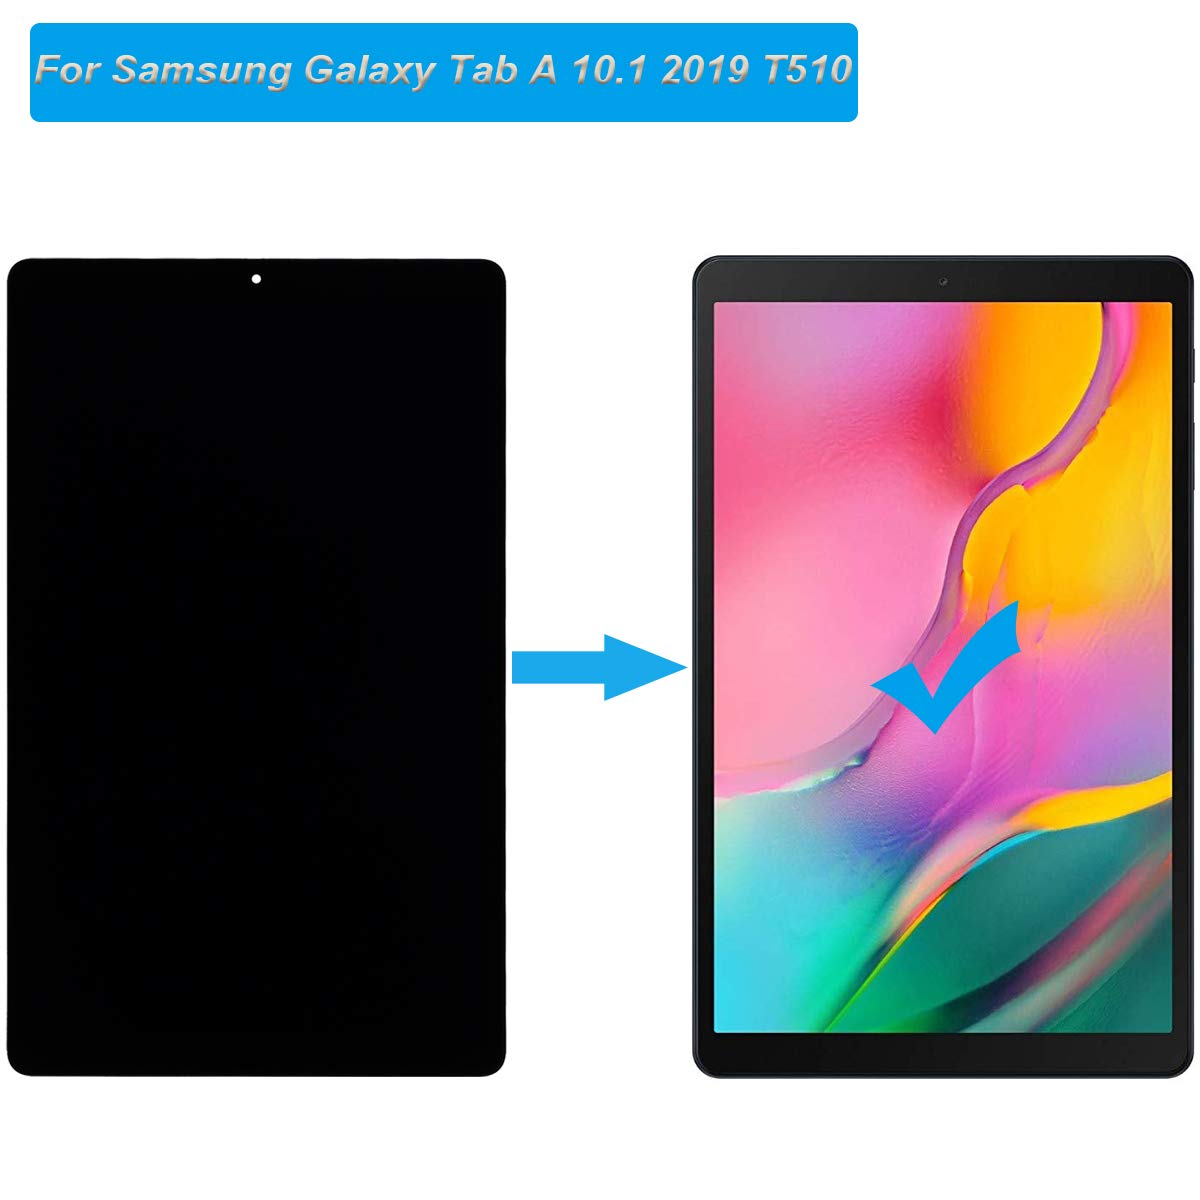 Samsung Galaxy Tab A 2019 T510 SM-T510F SM-T510 display lcd with black  touch screen